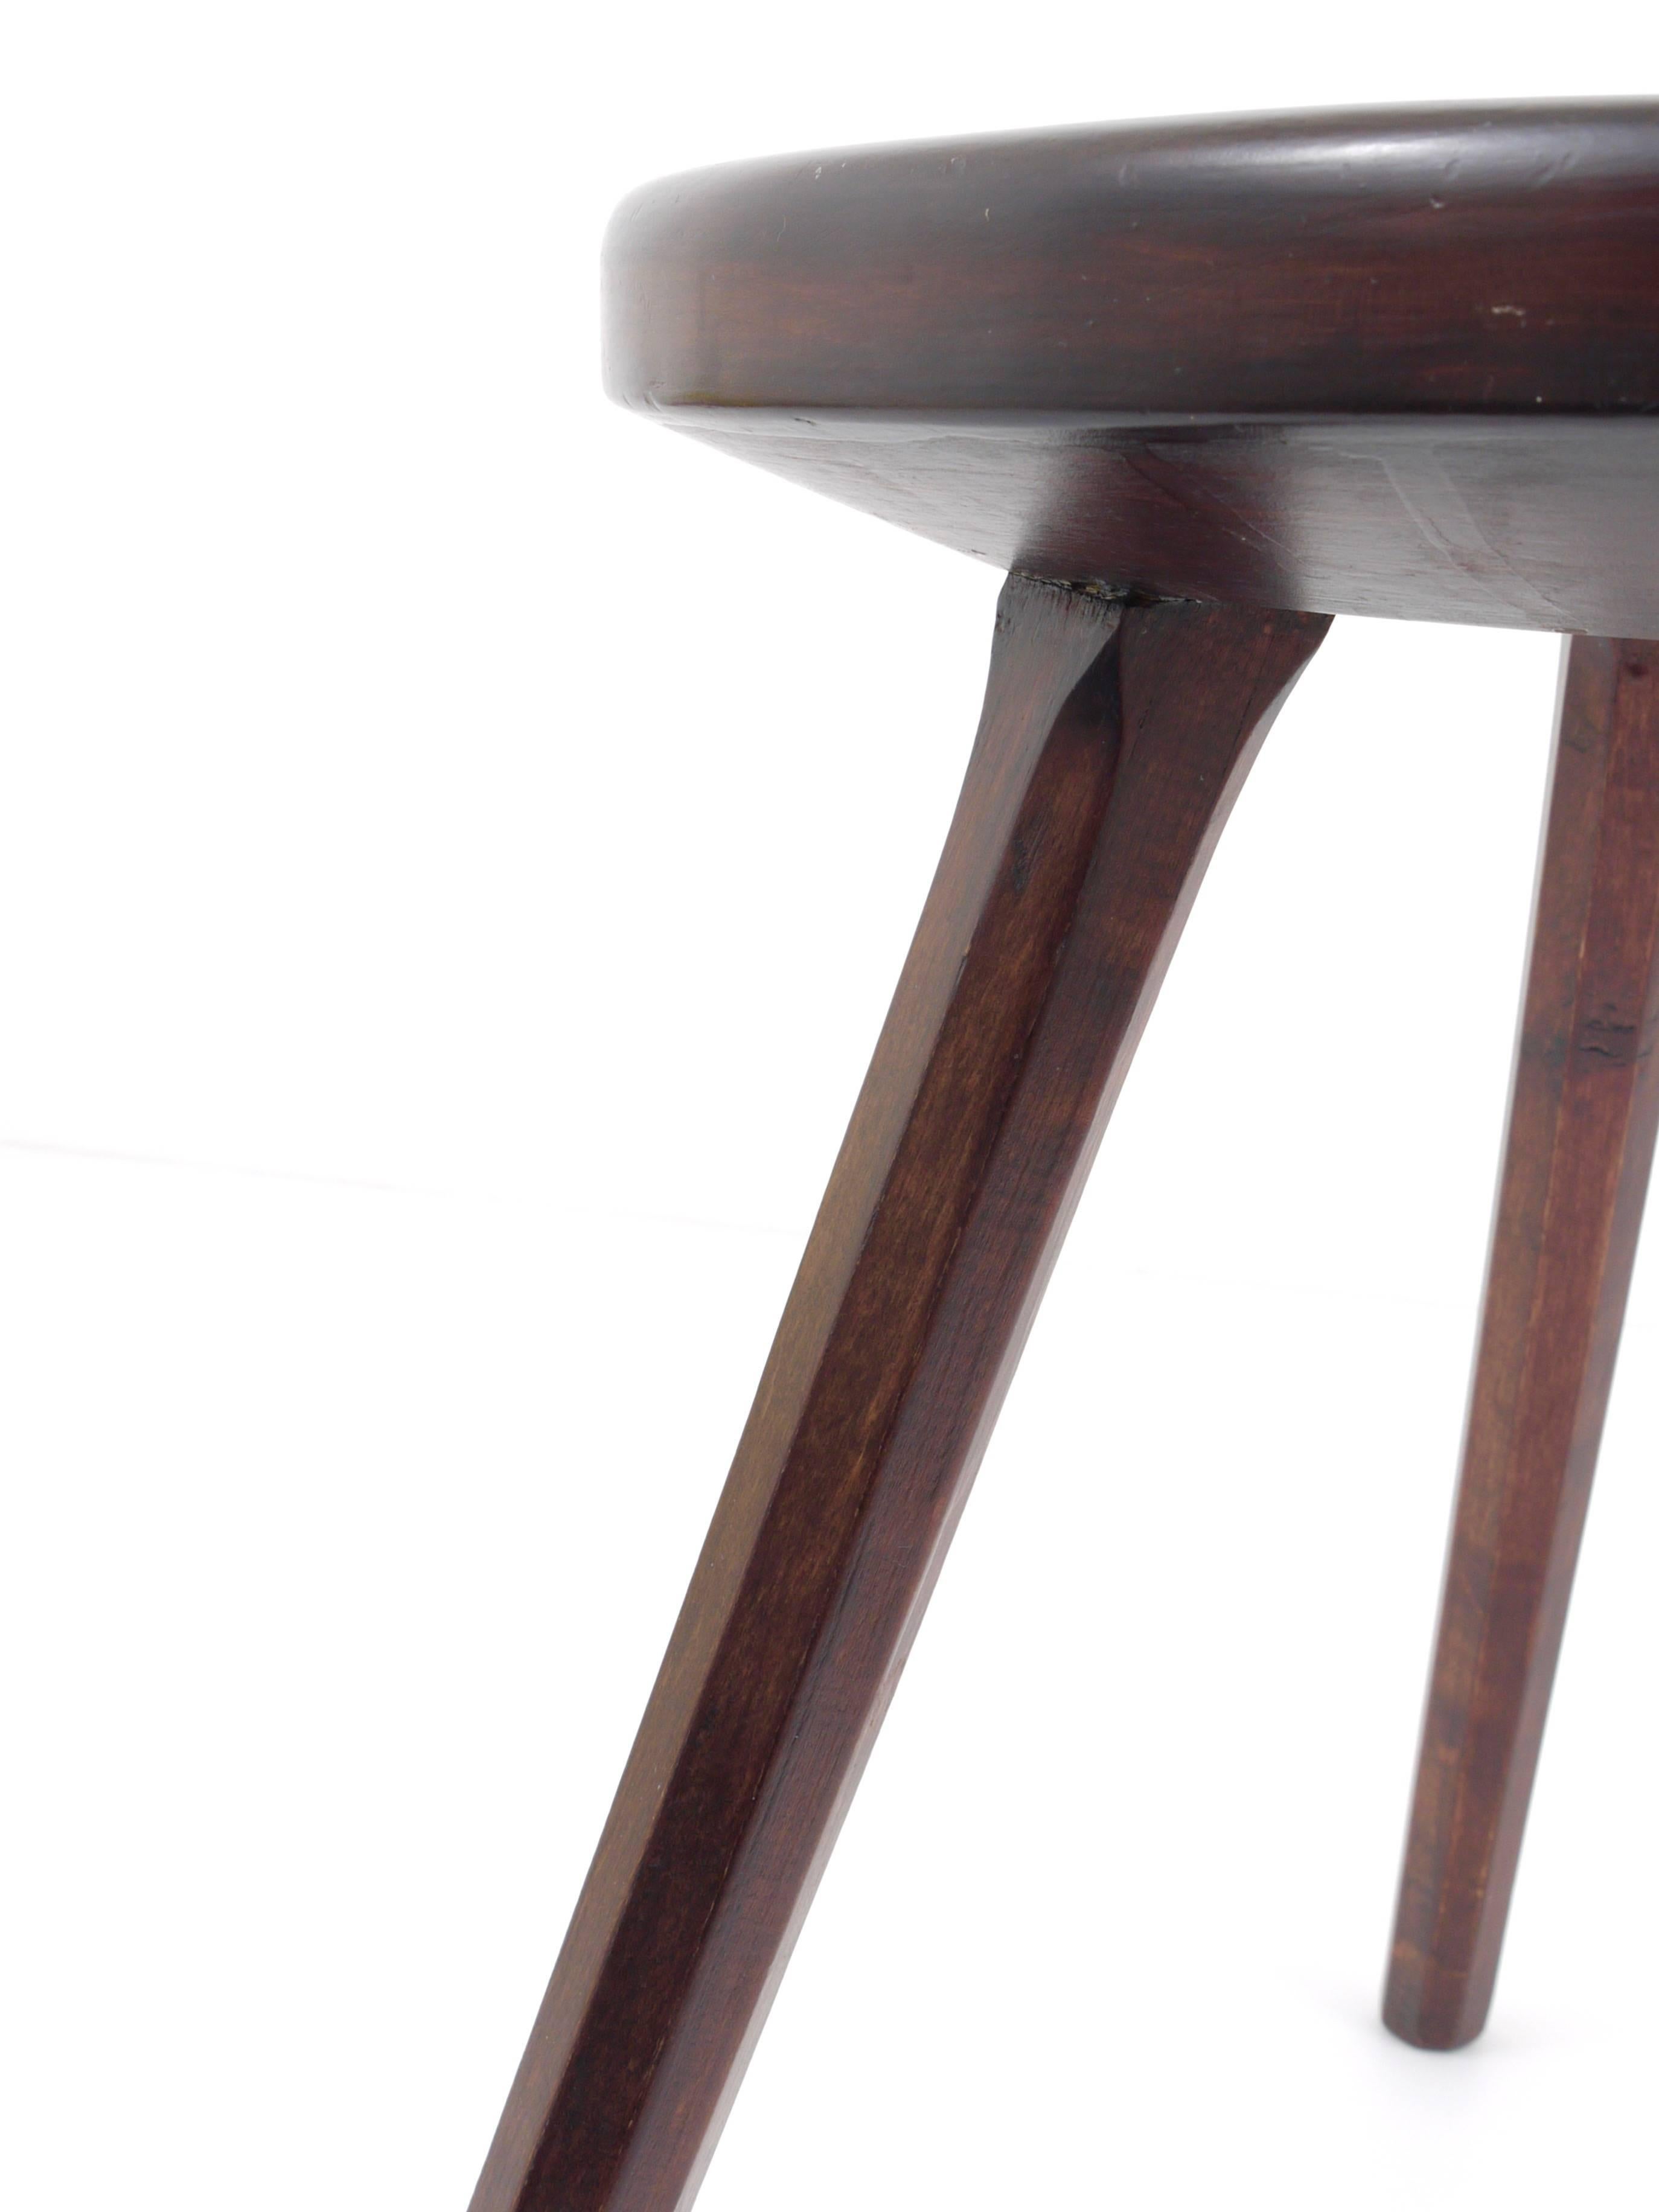 A beautiful French wooden stool from the 1950s in very good condition.